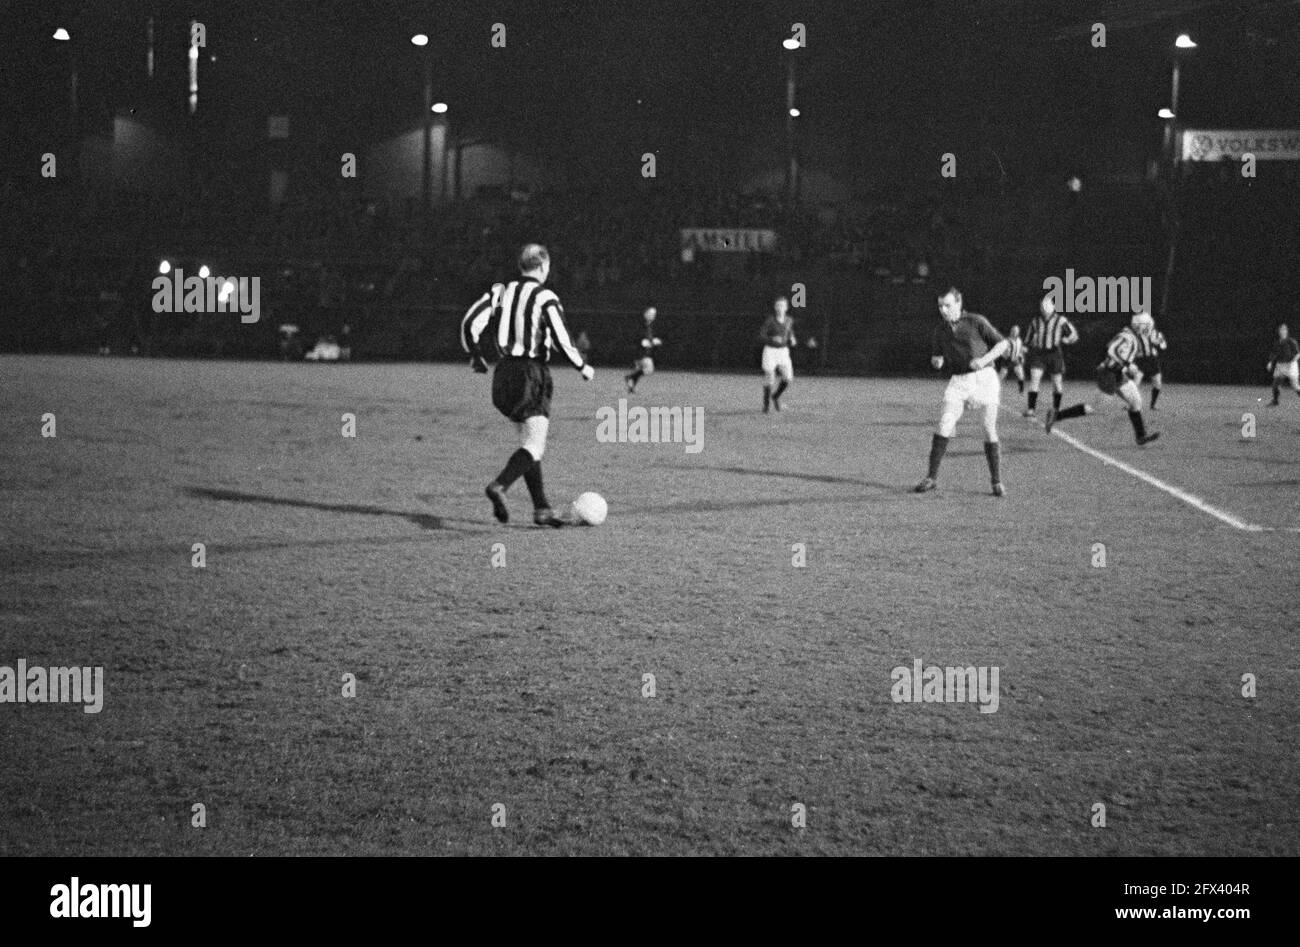 DWV against Volewijckers. Honorary match in Olympic Stadium. game time (final score 2-4 for the Volewijckers), April 4, 1962, sports, soccer, The Netherlands, 20th century press agency photo, news to remember, documentary, historic photography 1945-1990, visual stories, human history of the Twentieth Century, capturing moments in time Stock Photo